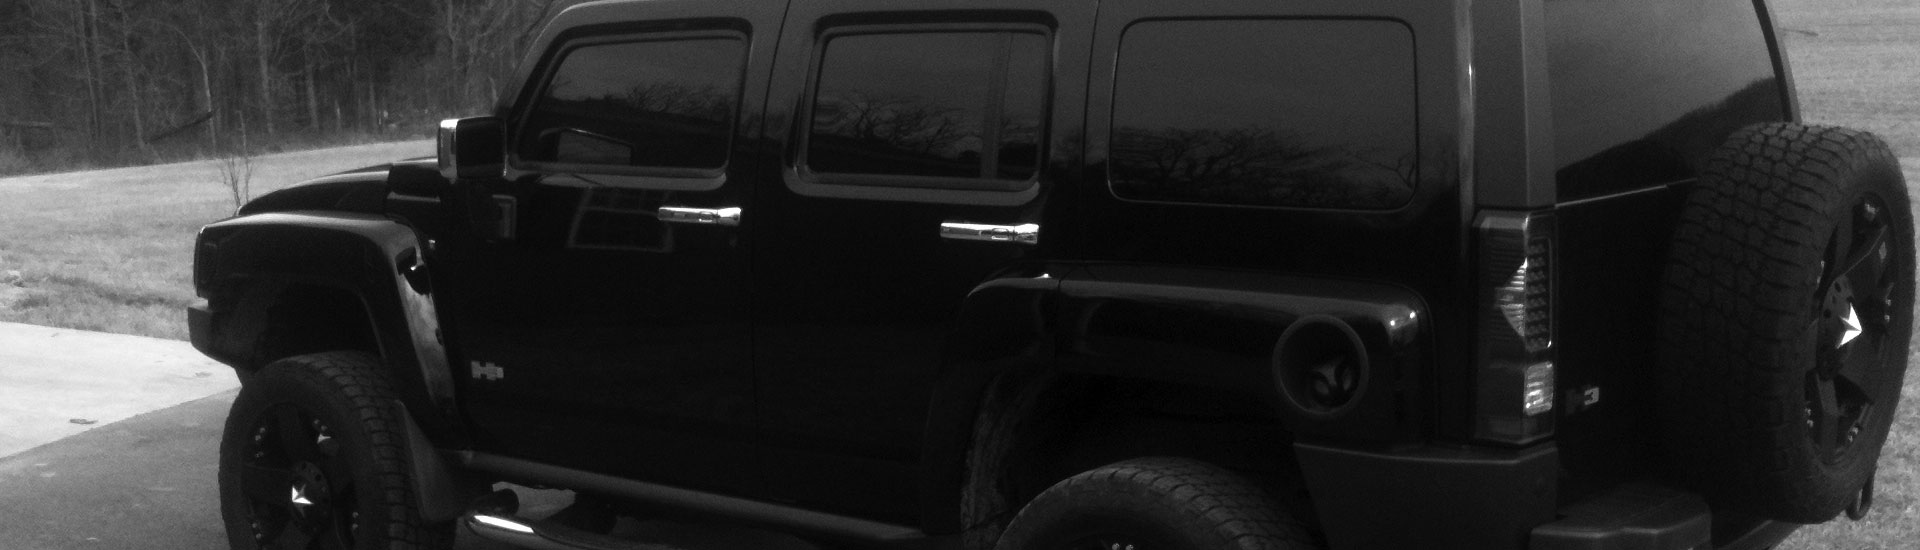 Hummer Tail Light Tint Covers